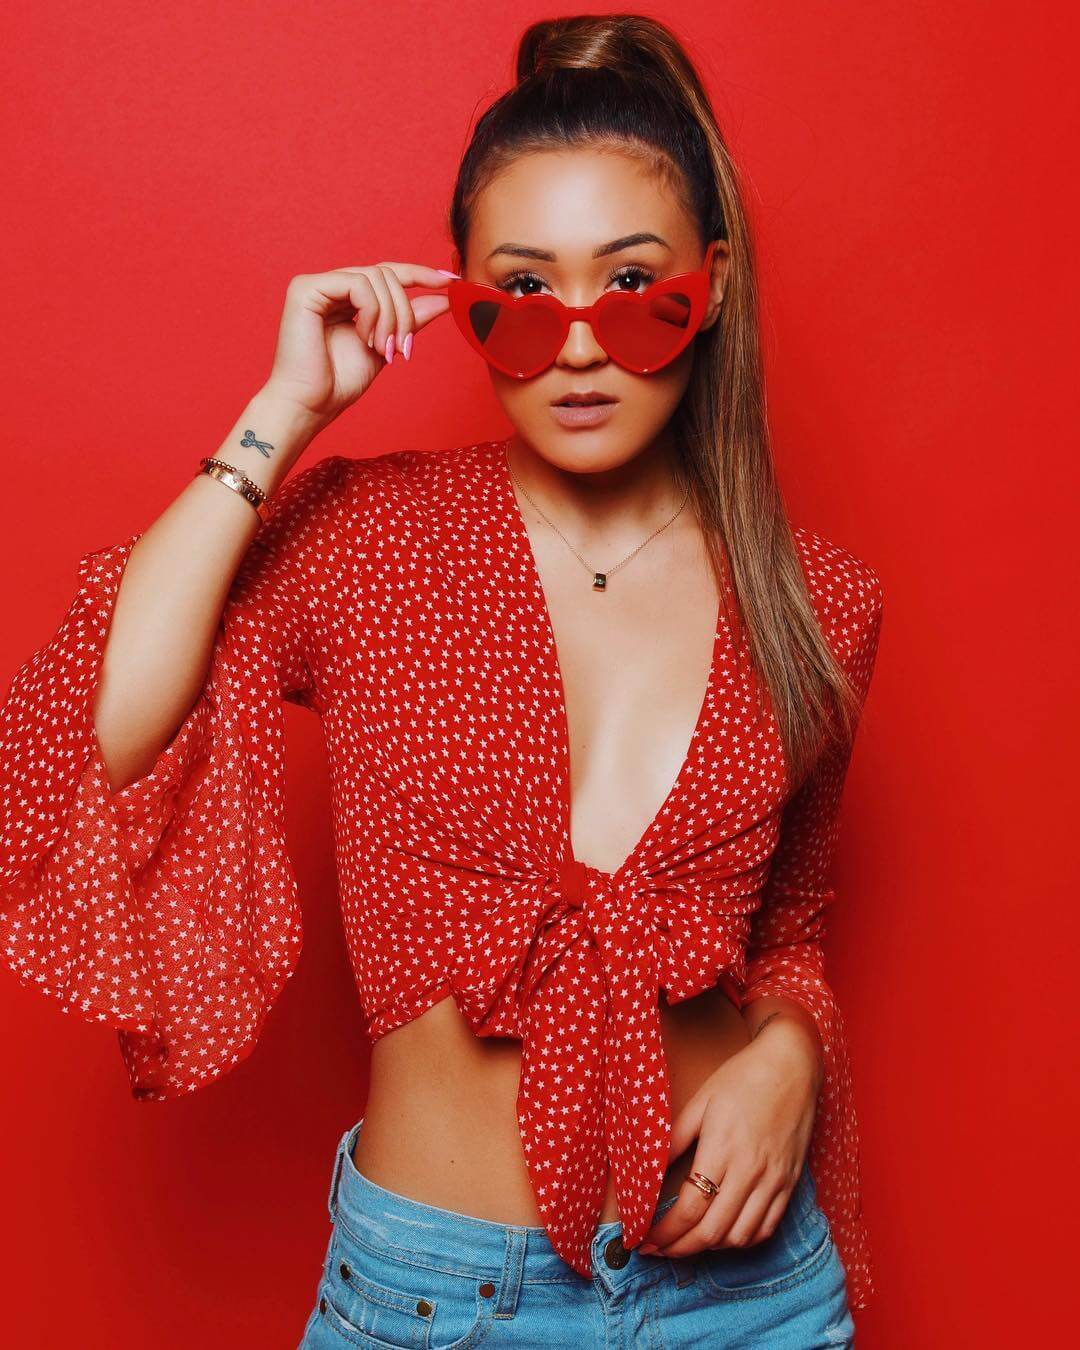 51 Sexy LaurDIY Boobs Pictures Are Essentially Attractive 14